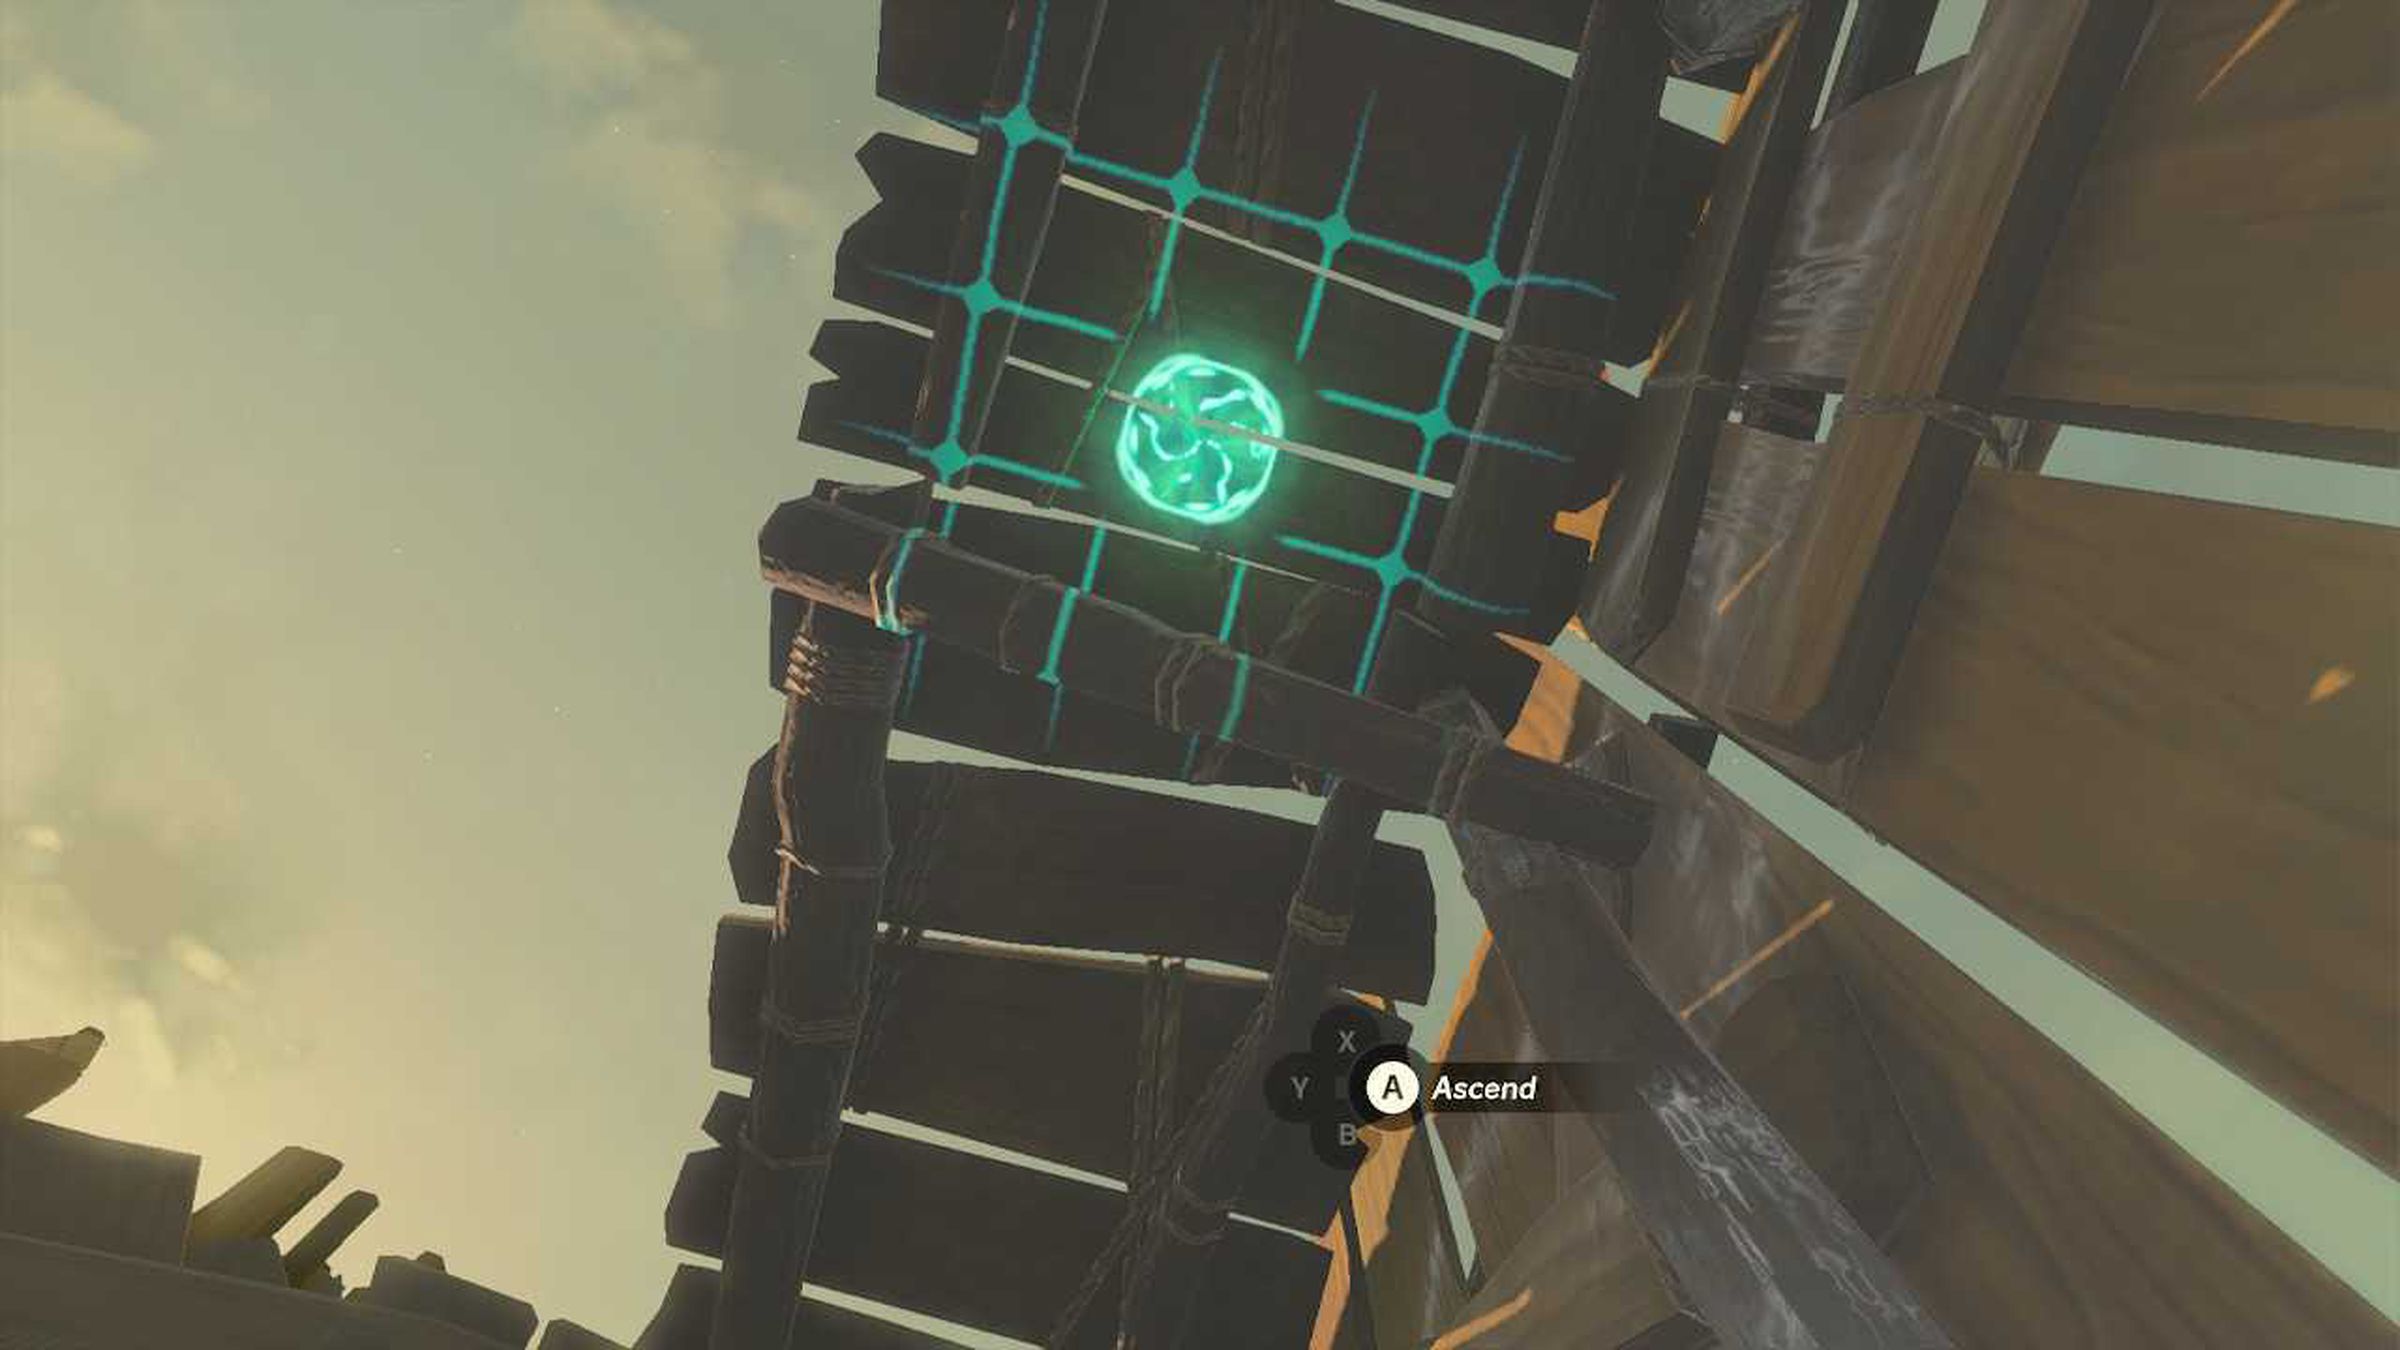 Screenshot from the Legend of Zelda: Tears of the Kingdom featuring Link activating his Ascend ability on a wooden plank surface.